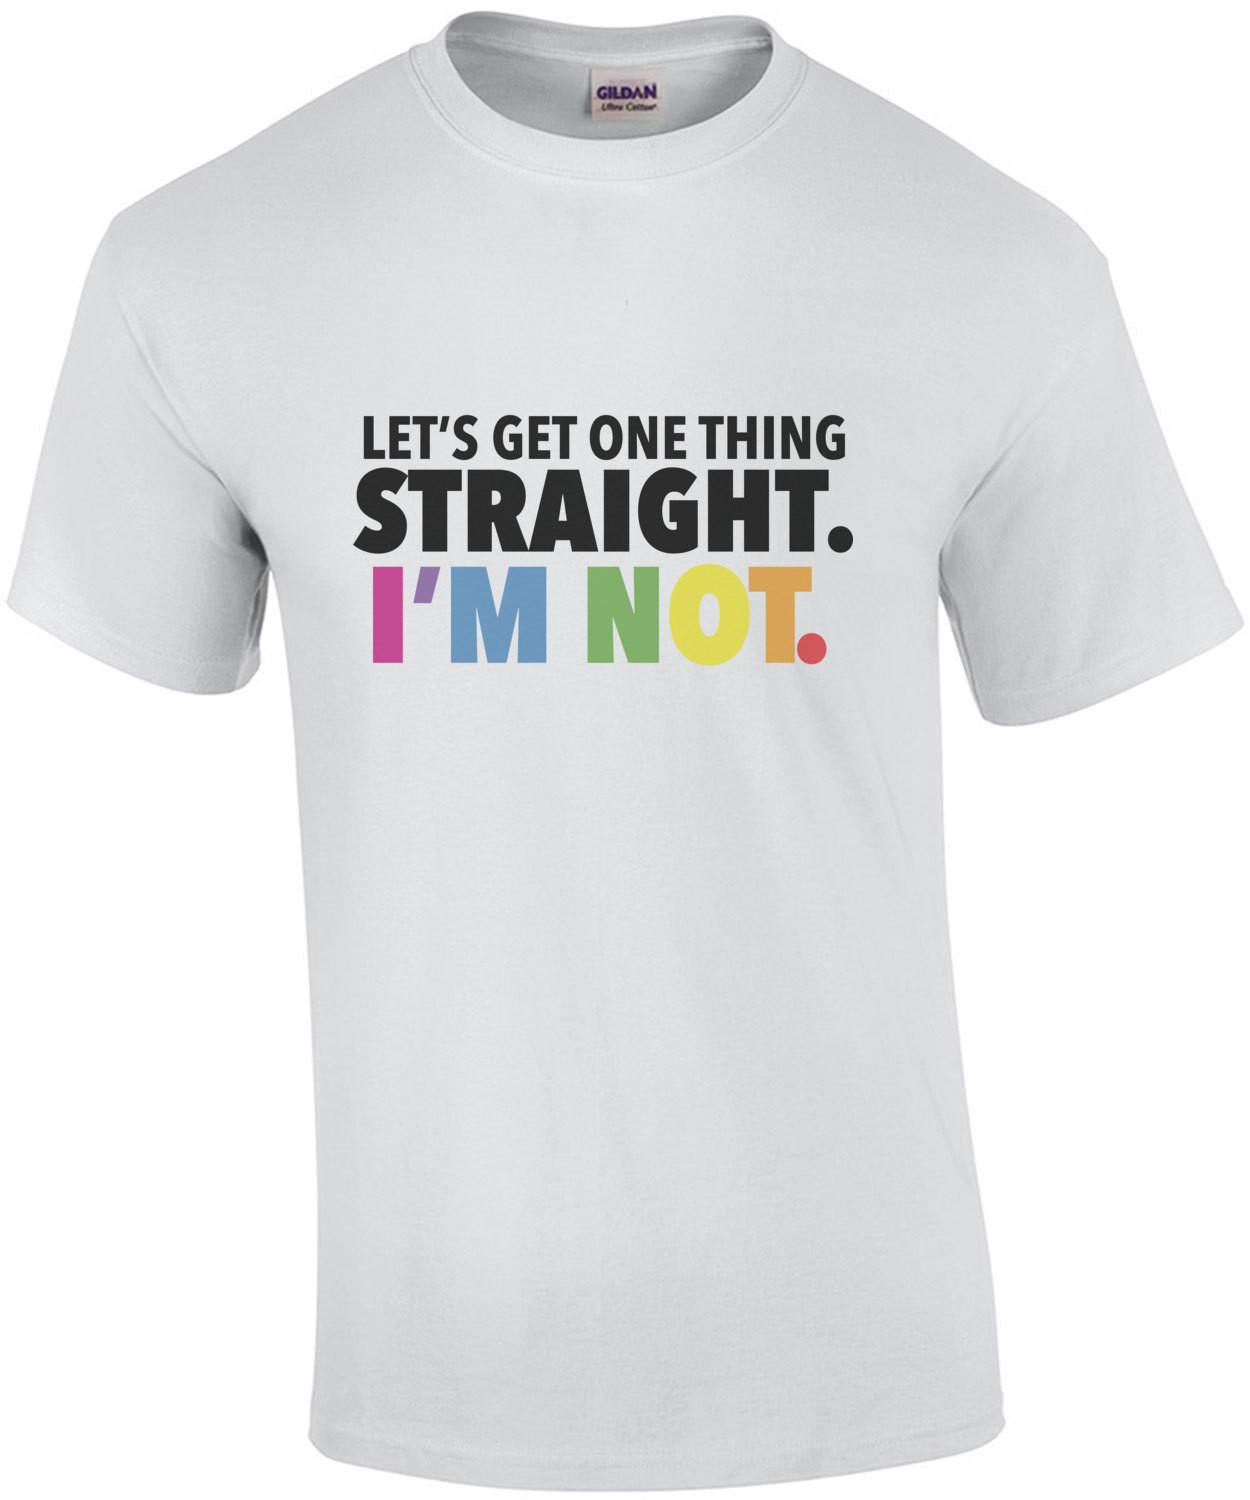 Lets get one thing straight. I'm not. Gay Pride T-Shirt - Lesbian T-Shirt